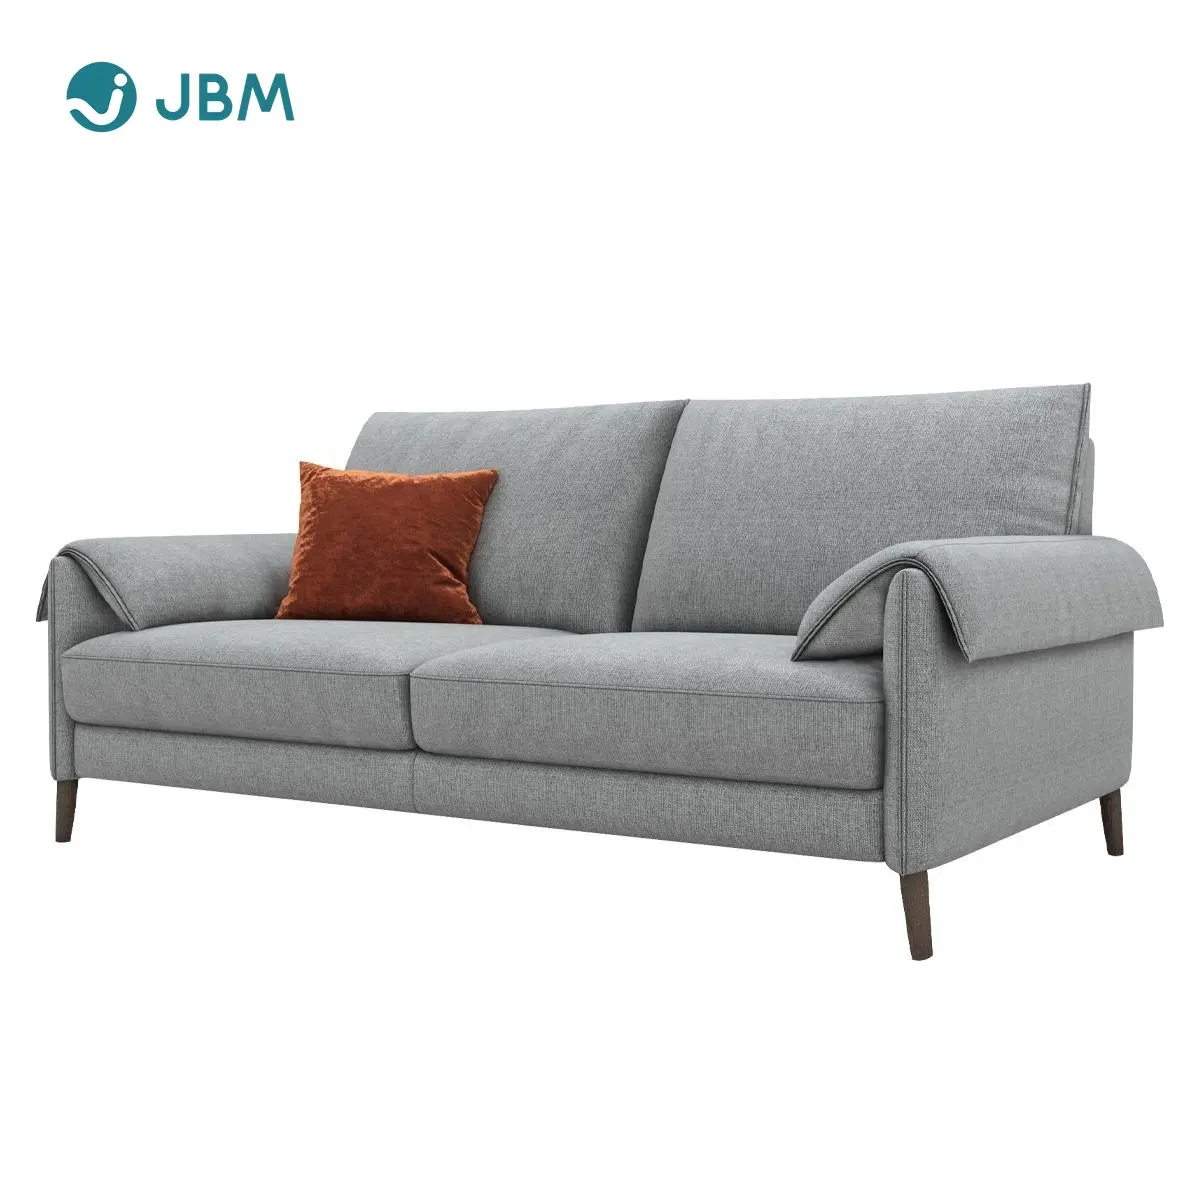 JBM EON Two Seats Modern Fabric Couch Sofa Japanese style Home Furniture Foldable Living Room sofas